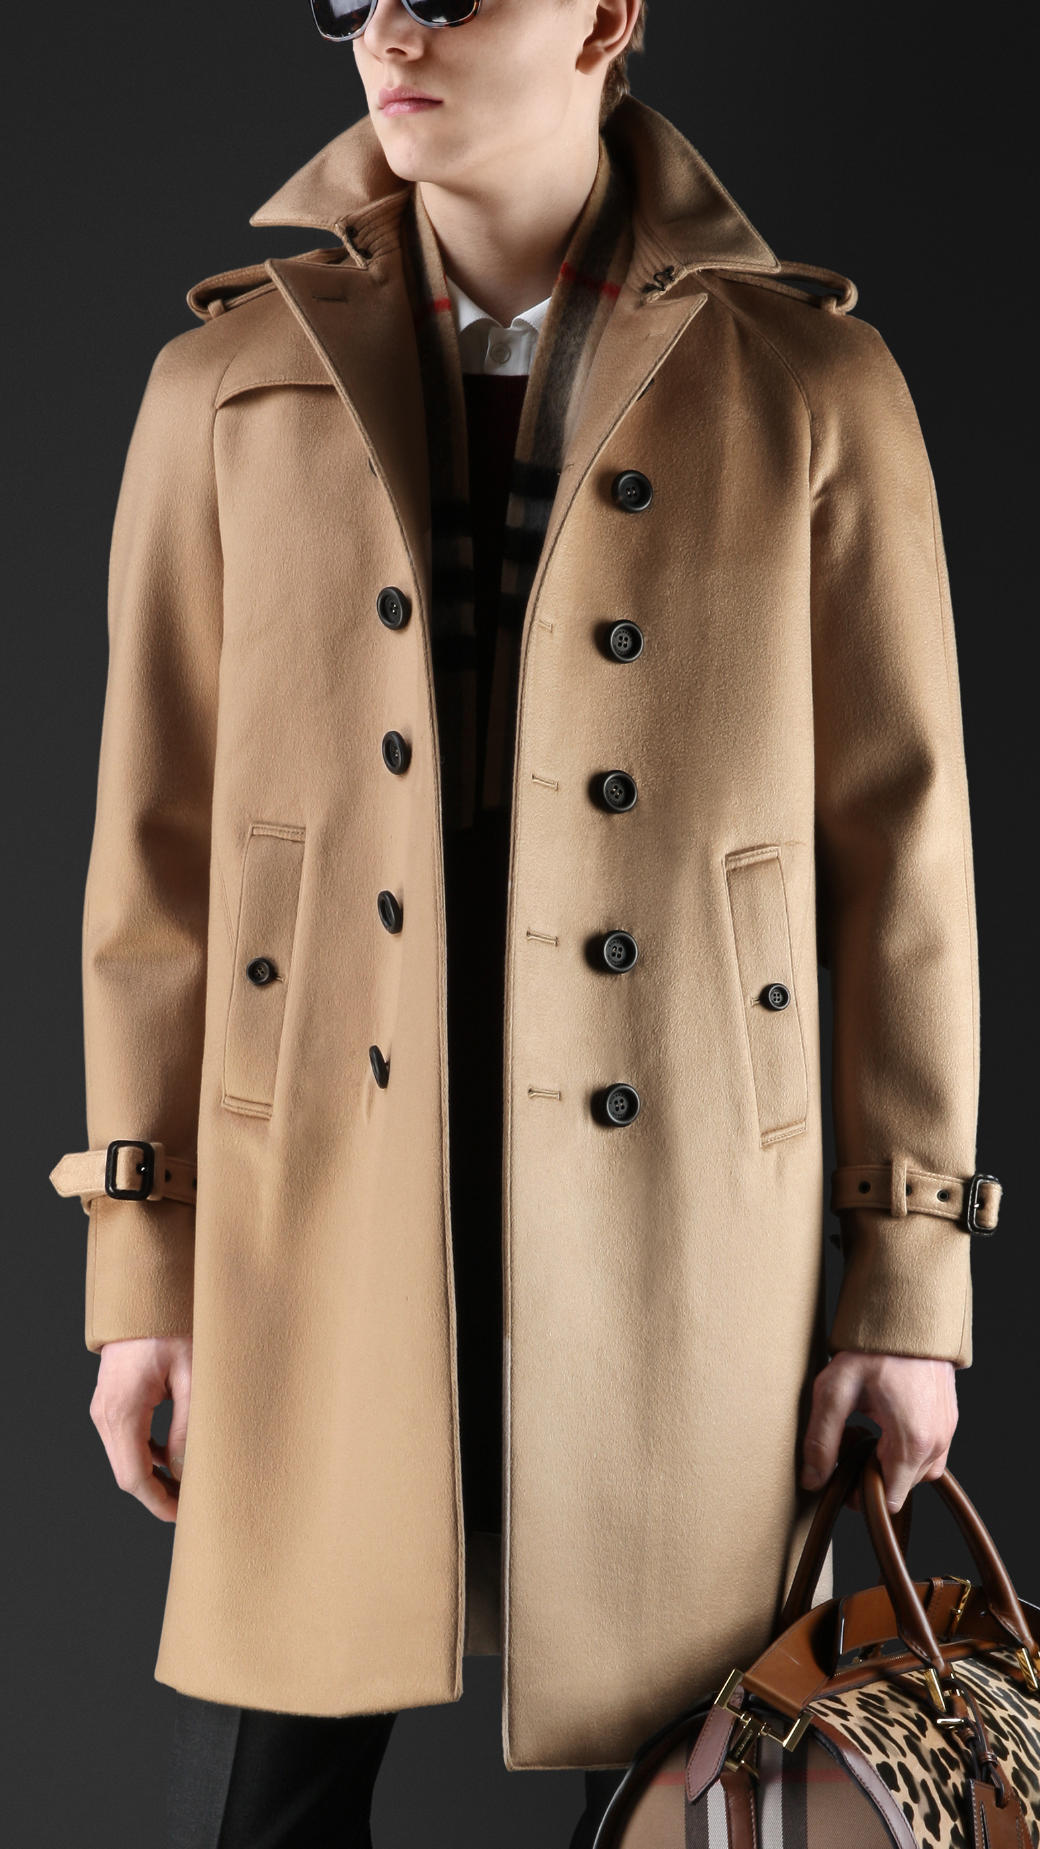 Lyst - Burberry Bonded Cashmere Trench Coat in Natural for Men